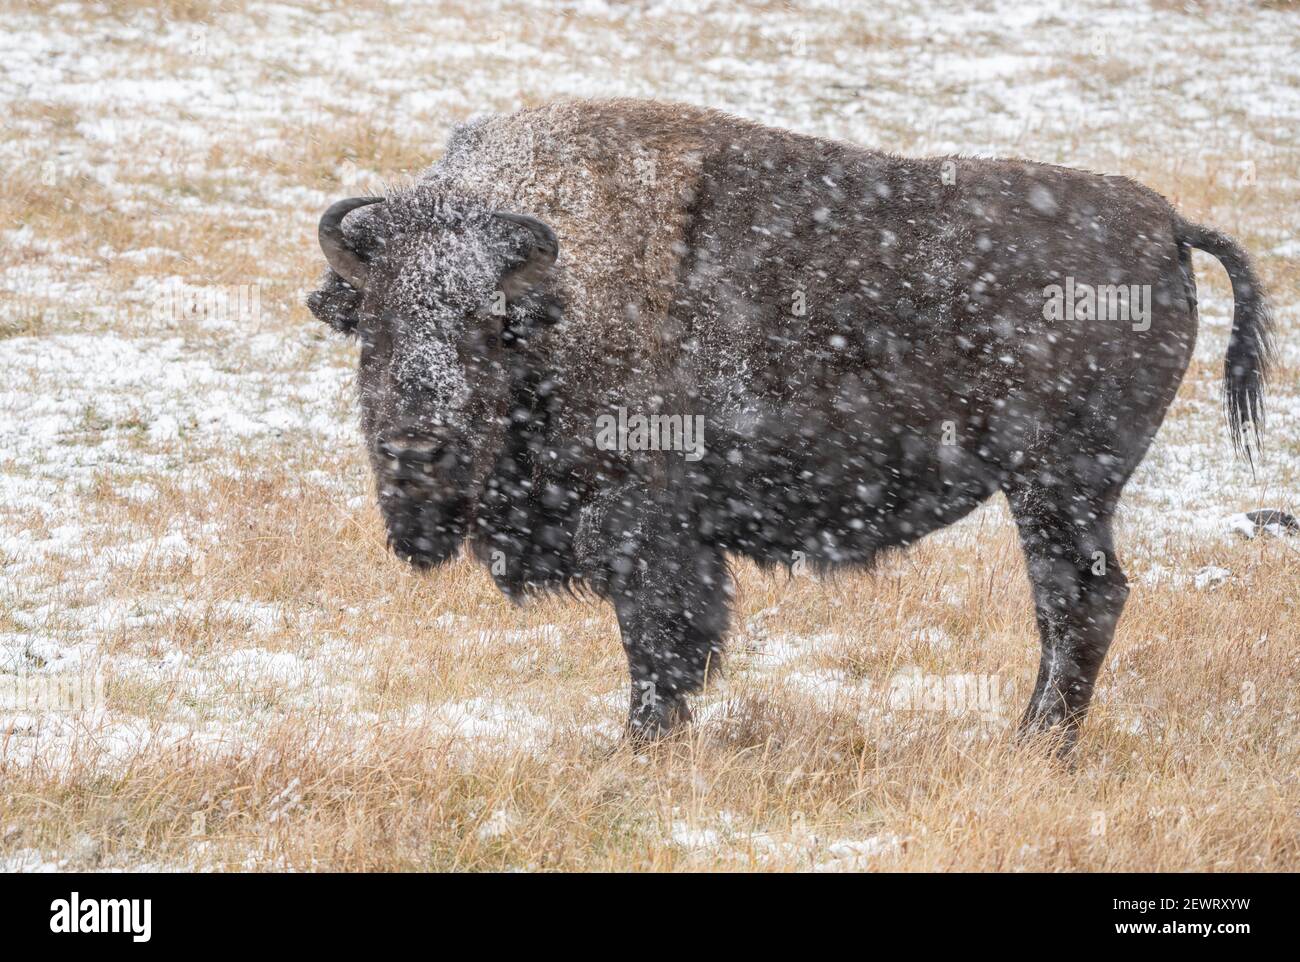 American bison (Bison bison), standing in snow storm, Grand Teton National Park, Wyoming, United States of America, North America Stock Photo